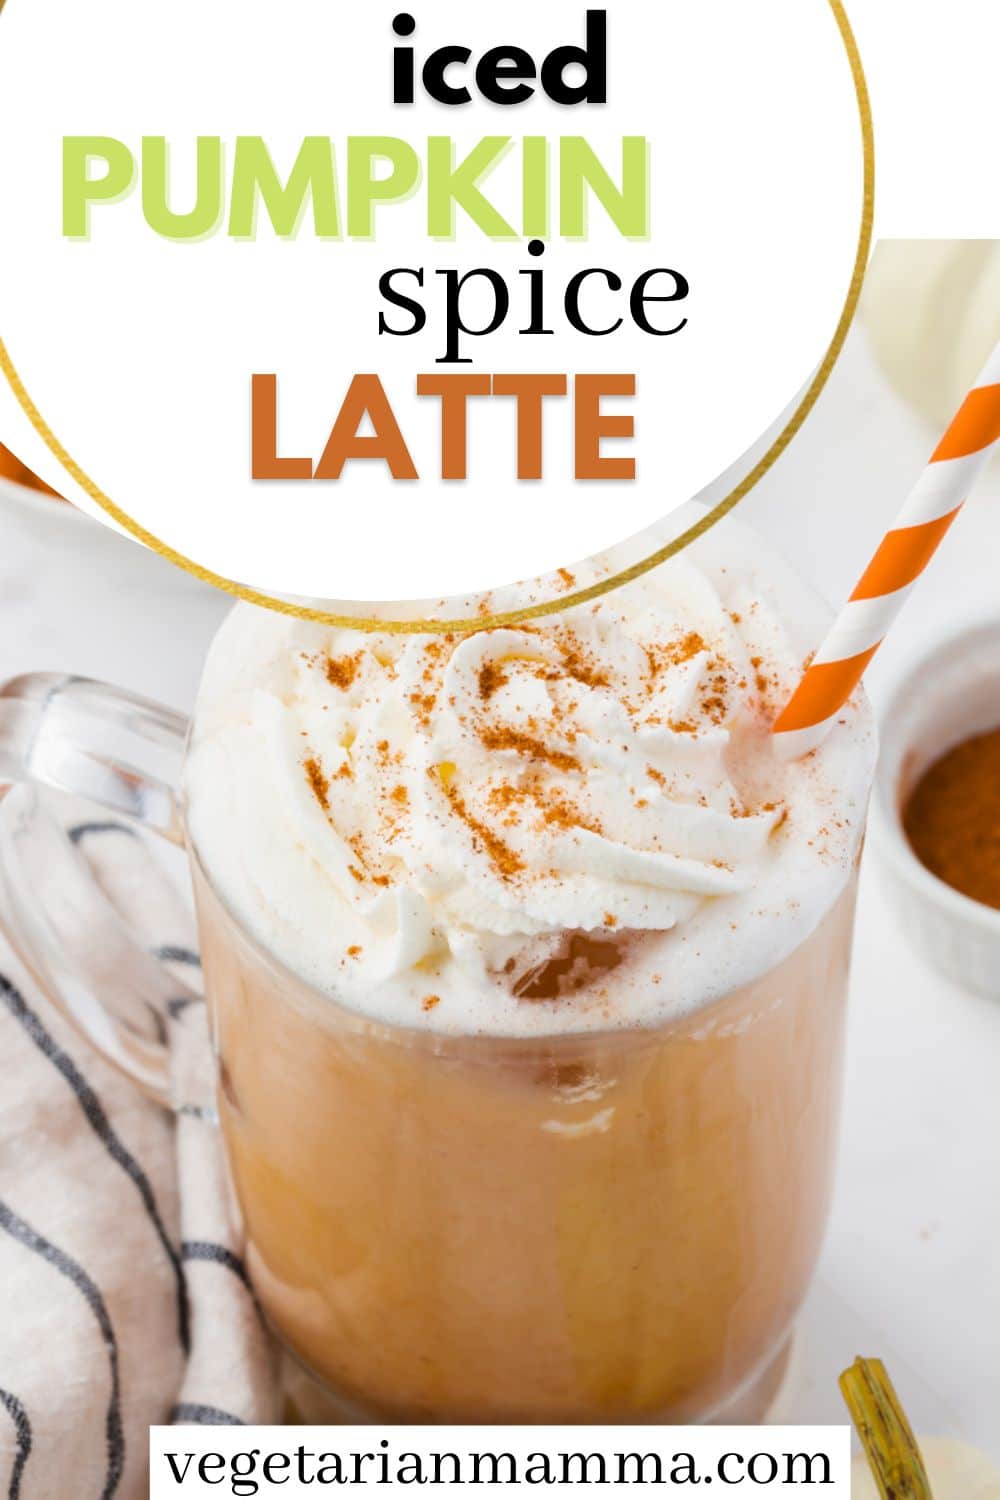 The best Iced Pumpkin Spice Latte is the one you make at home with real pumpkin puree, warm spices, maple syrup, and your choice of milk. This tasty drink will be ready in 5 minutes, exactly the way you like it.